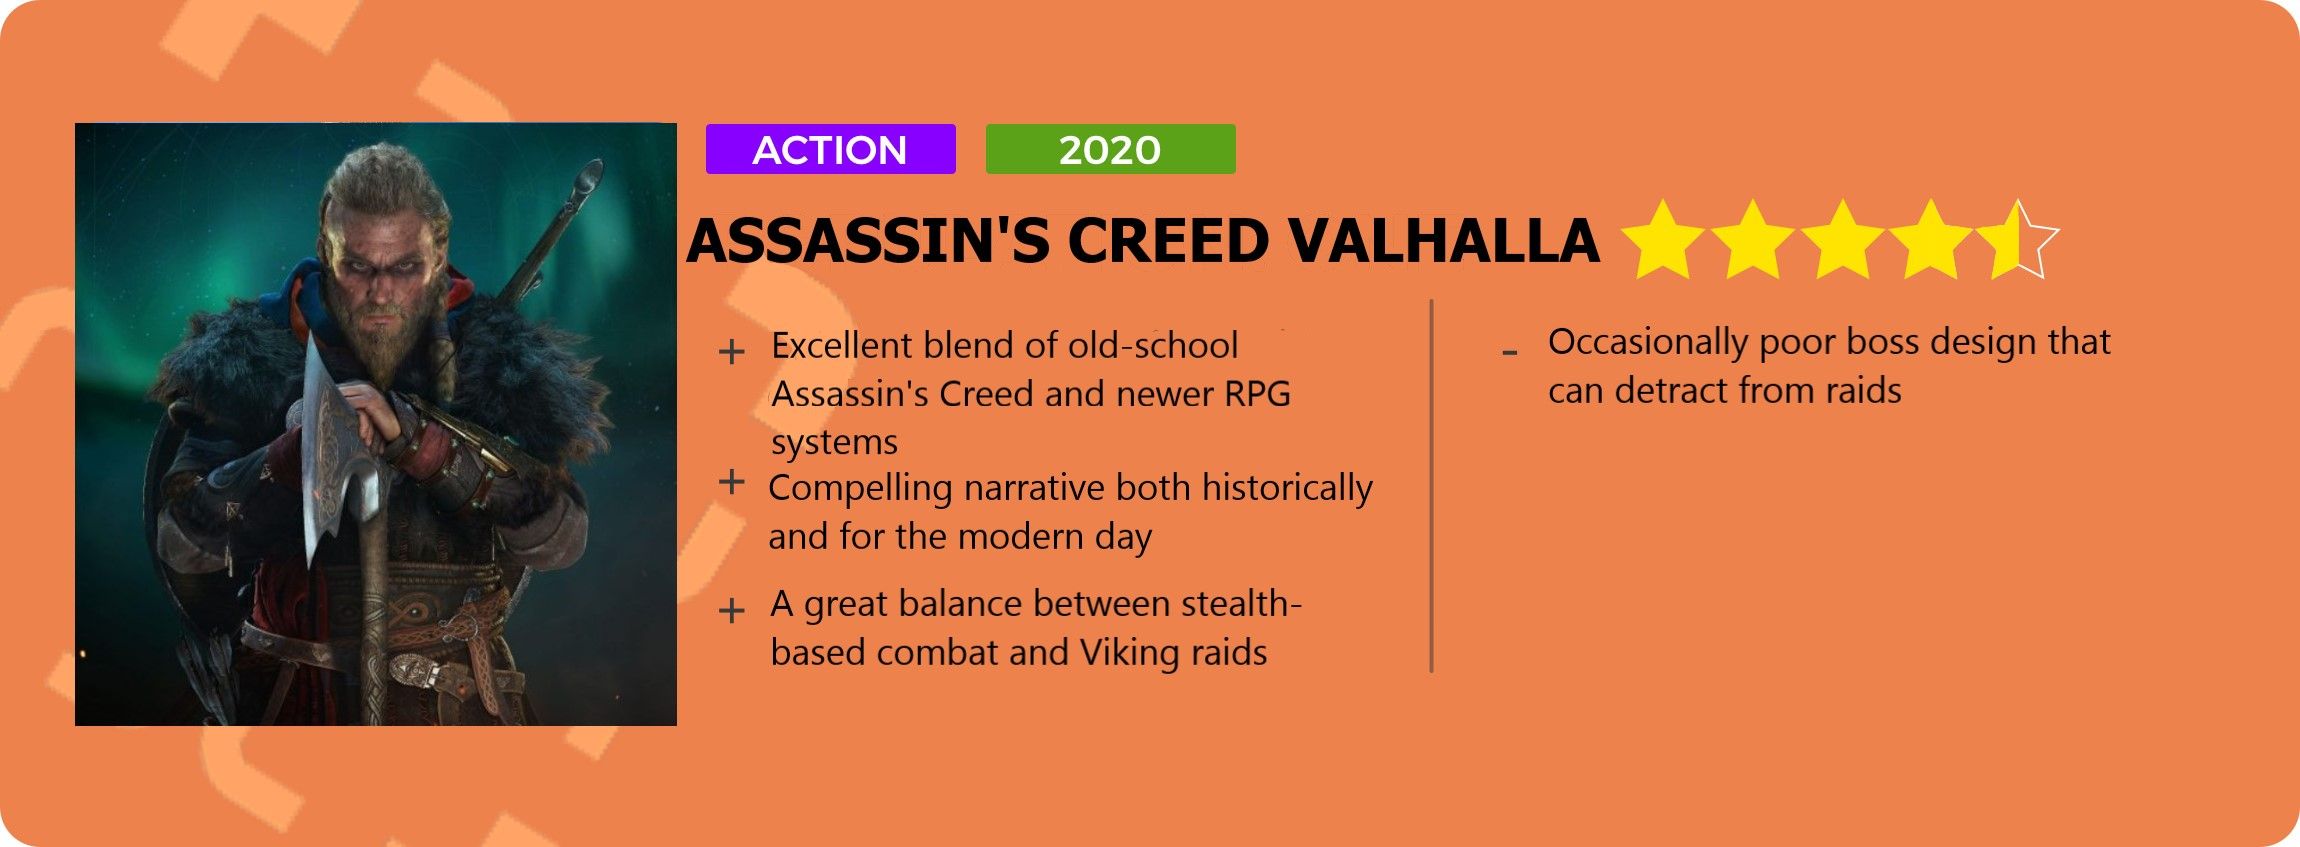 Assassin's Creed Valhalla review